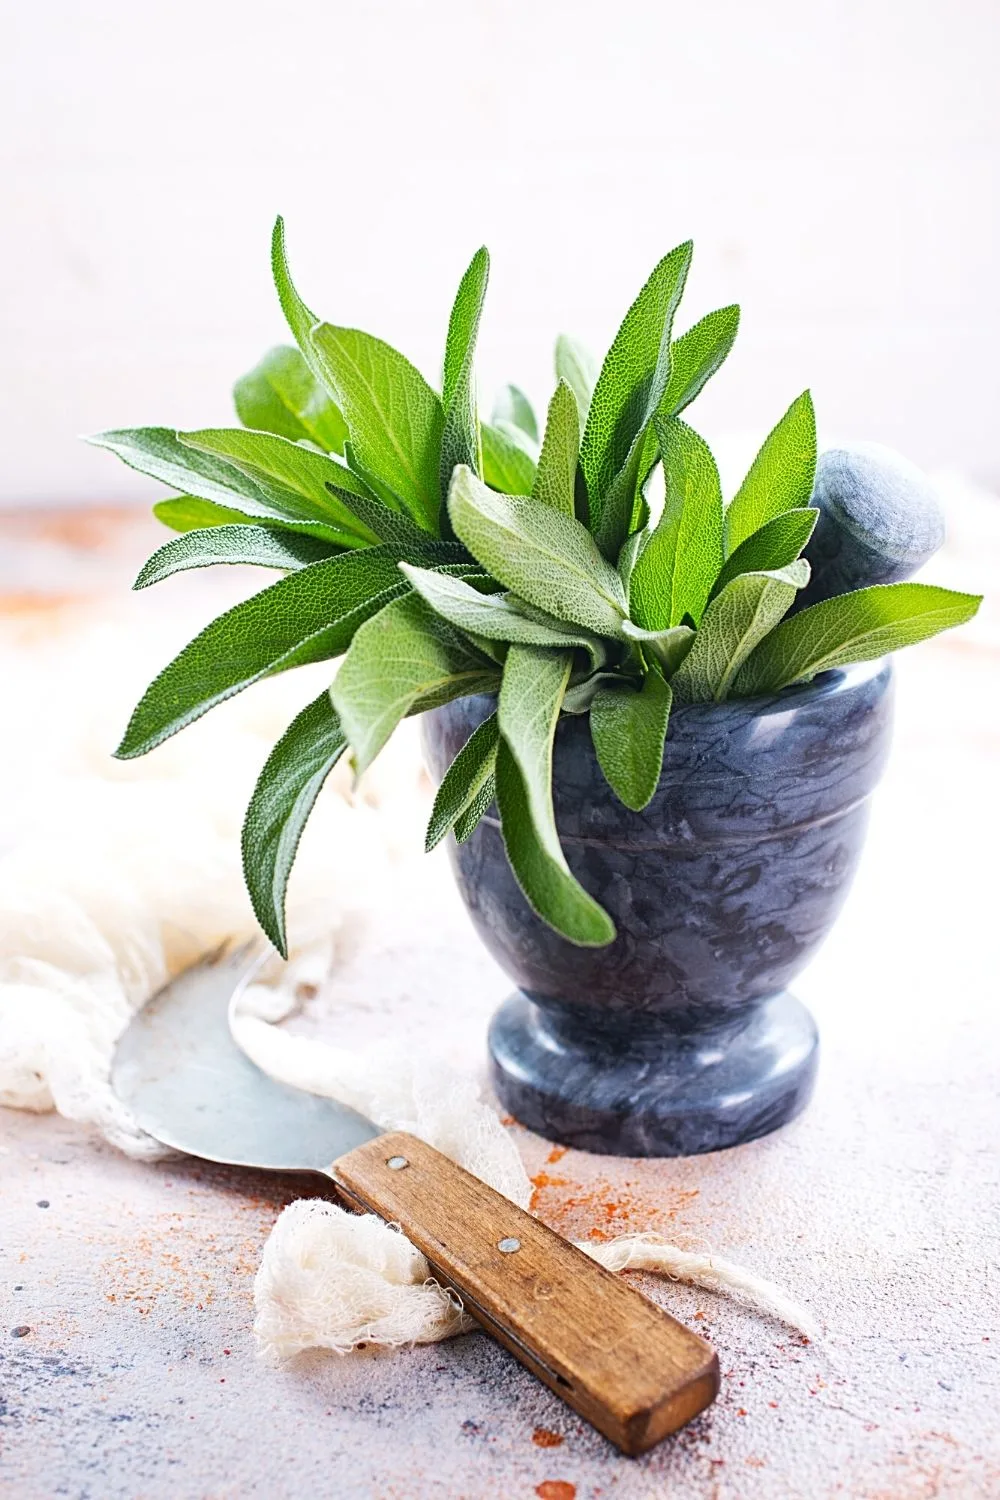 Sage, with its strong-scented leaves, can be easily grown on a south-facing balcony